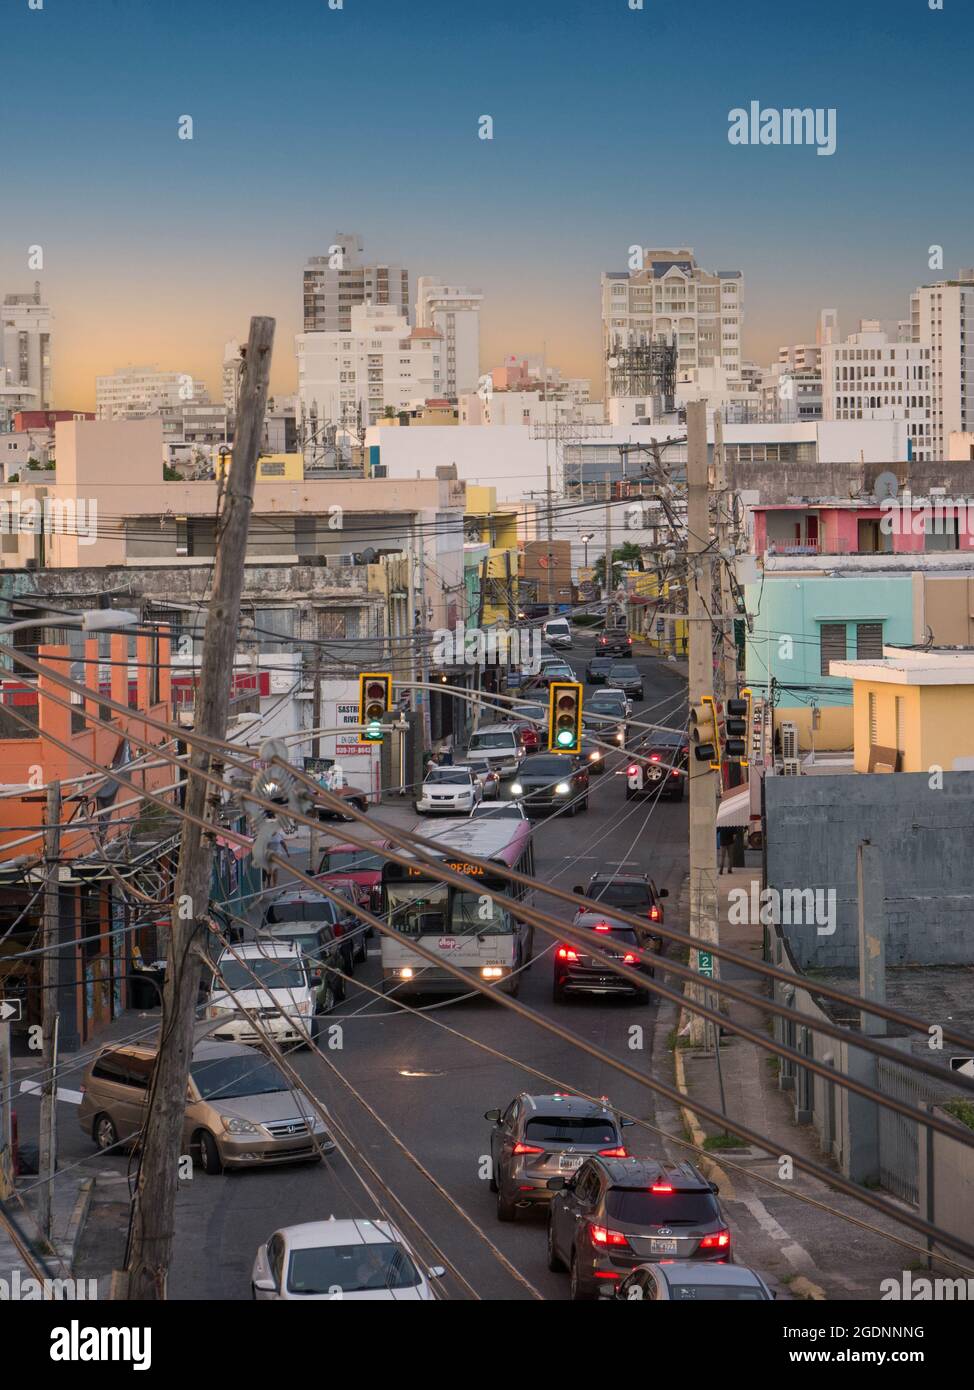 Santurce, San Juan, Puerto Rico. January 2021. Calle Loiza is the place where you feel at home in Santurce Puerto Rico. An authentic Puerto Rican comm Stock Photo